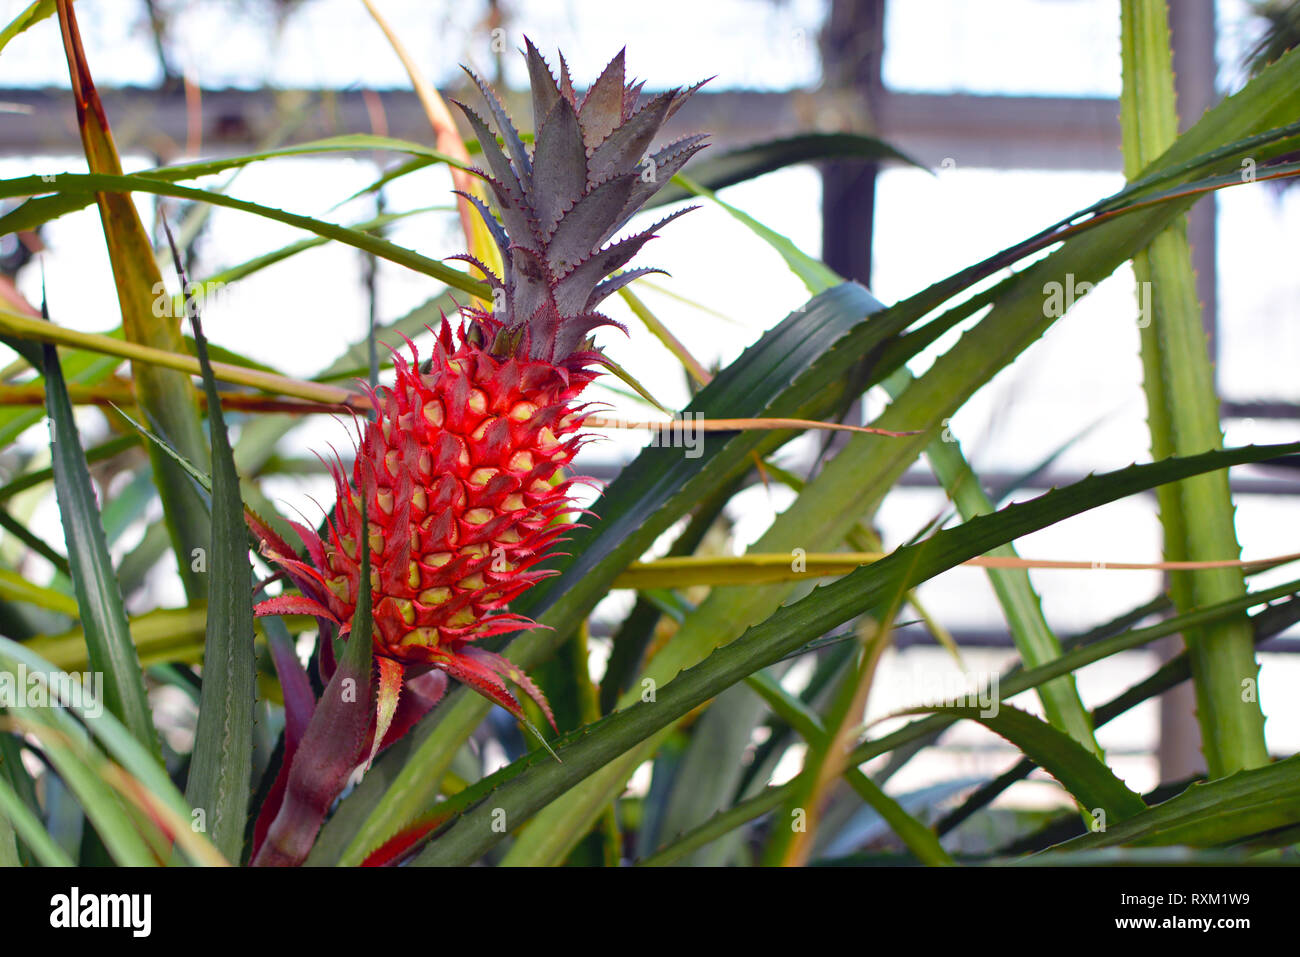 Close up of a red pineapple fruit of an Ananas Bracteatus bromeliad plant Stock Photo